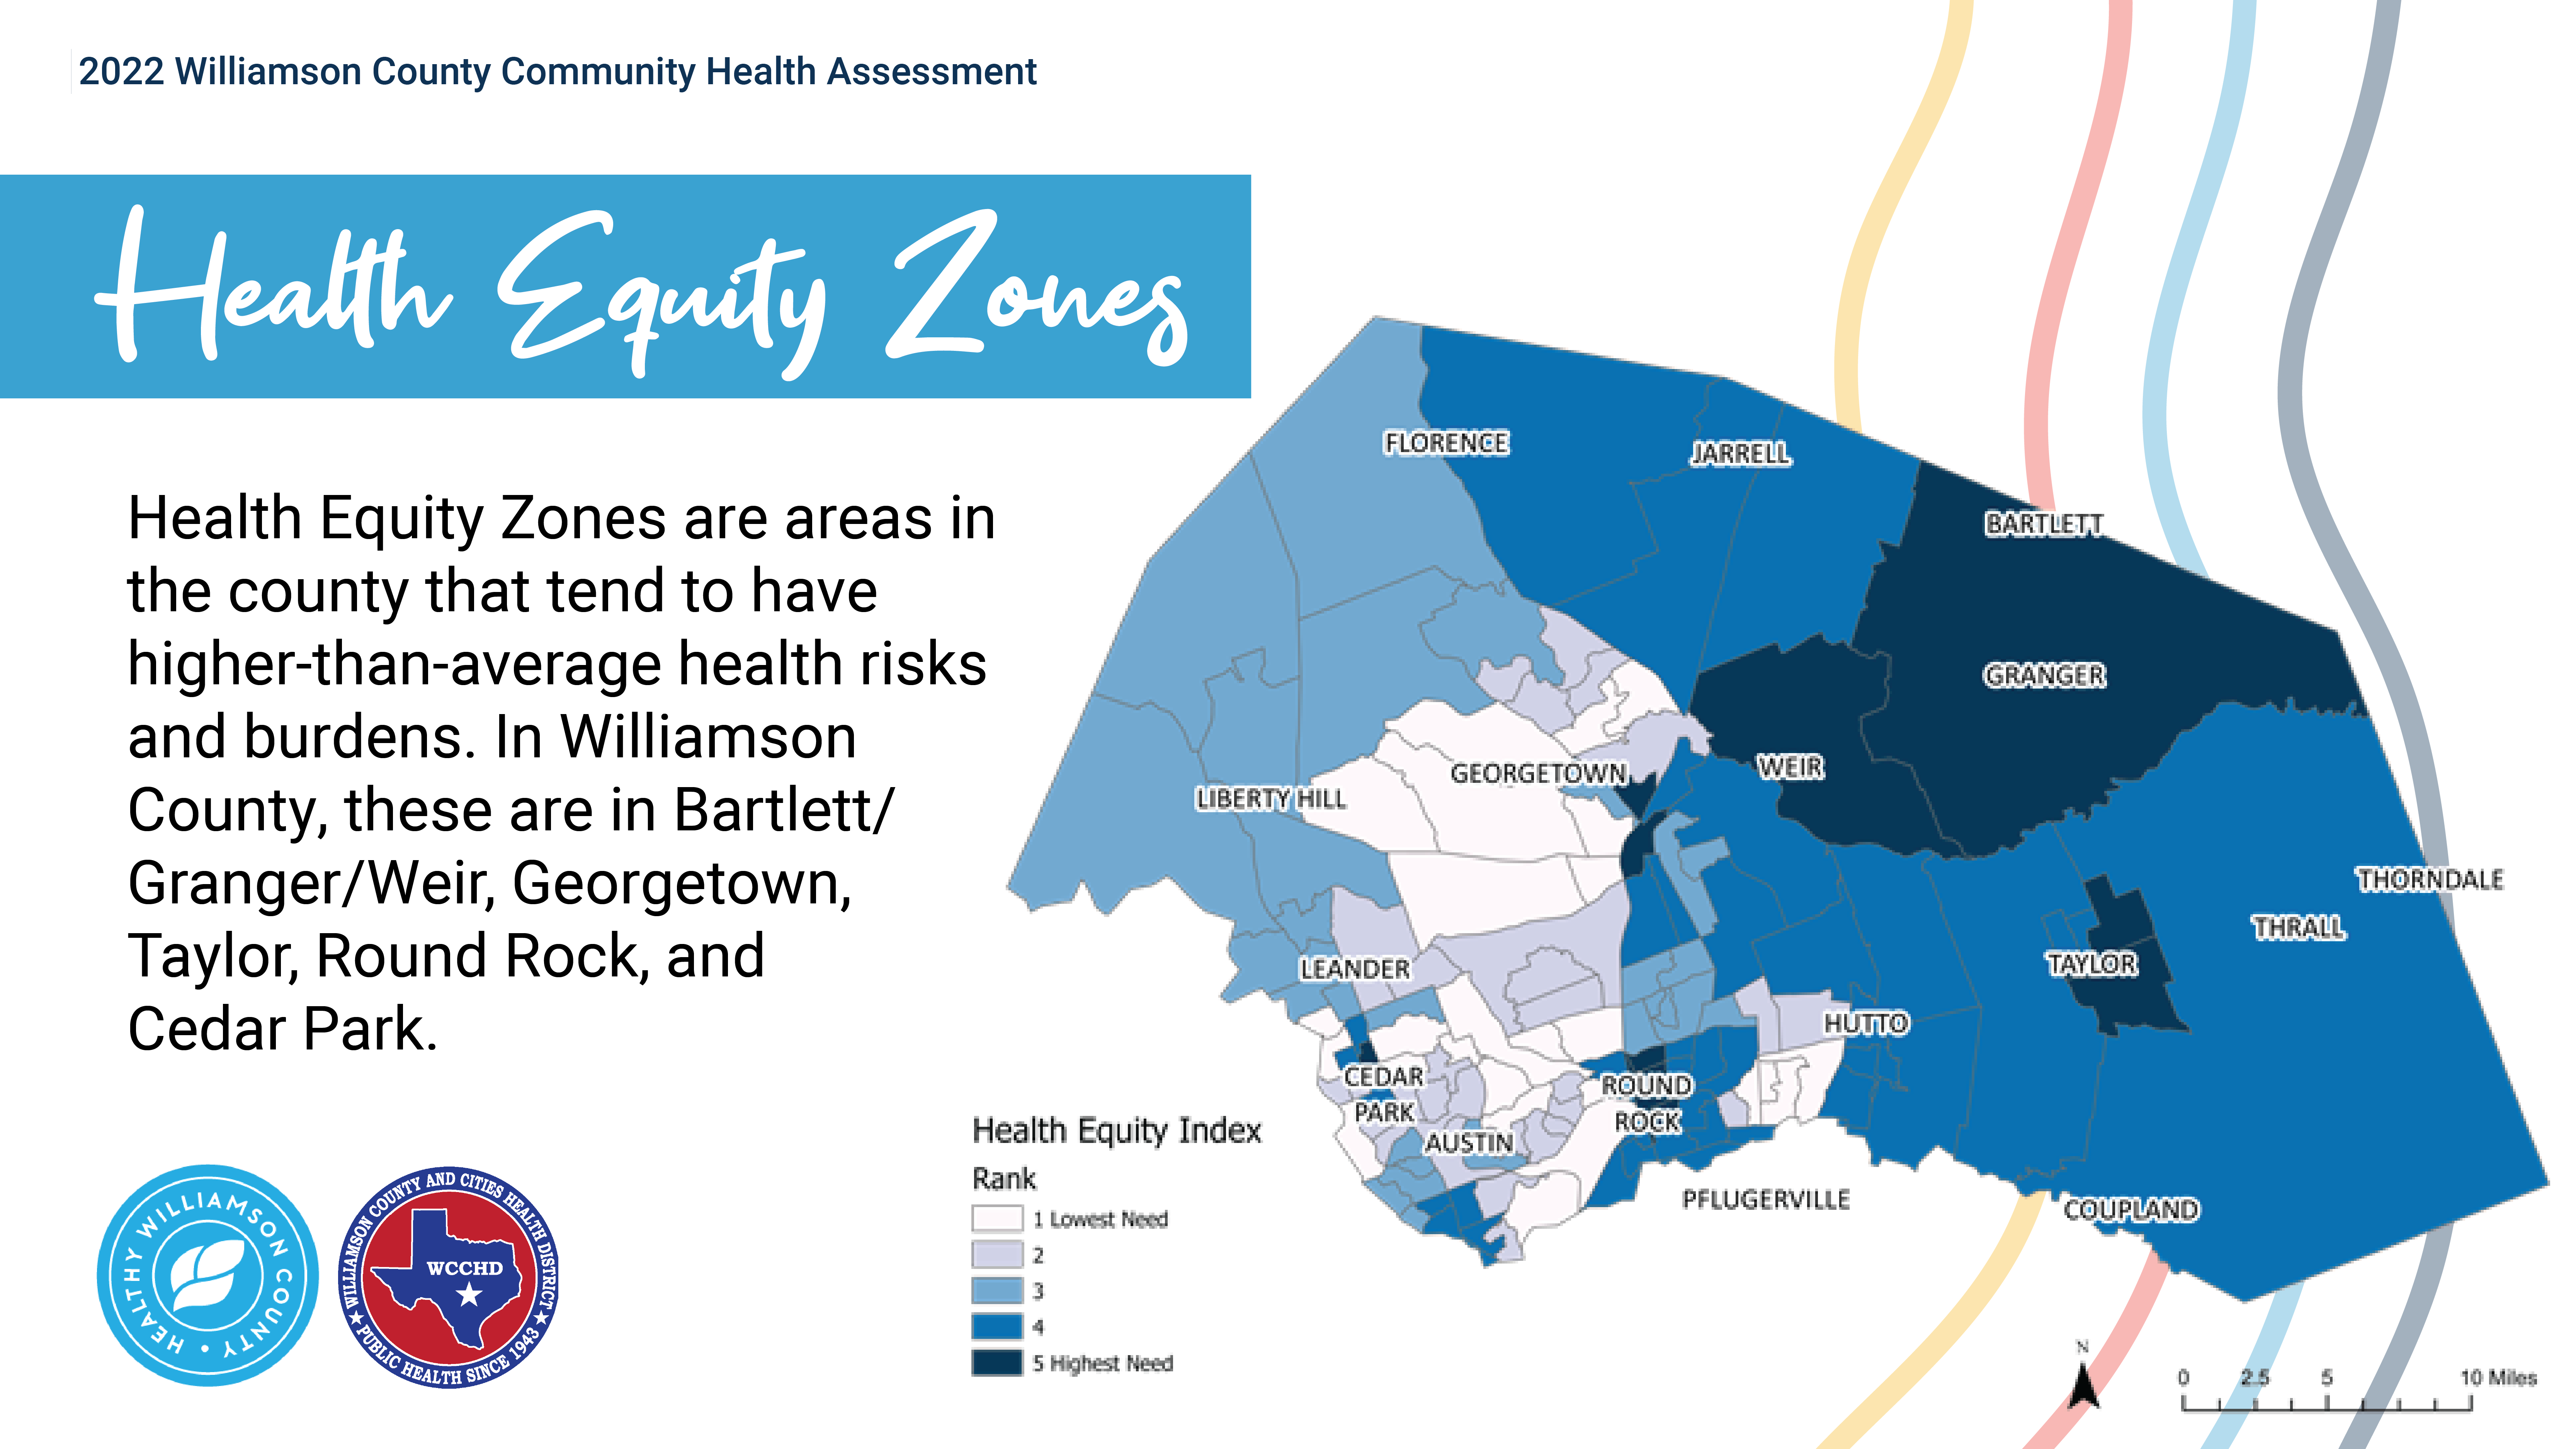 2022 Williamson County Community Health Assessment. Health Equity Zones. Health Equity Zones are areas in the county that tend to have higher-than-average health risks and burdens. In Williamson County, these are in Bartlett/Granger/Weir, Georgetown, Taylor, Round Rock, and Cedar Park. To the right, a map of Williamson County with ZIP code areas outlined and filled with graded shades of blue. The darkest shade of blue is seen in ZIP code areas in Bartlett/Granger/Weir, Georgetown, Taylor, Round Rock, and Cedar Park. Legend in bottom left of map titled "Healthy Equity Index" with shades of blue indicating rank: lightest blue shade is ranked 1, indicating lowest need; three intermediate shades (ranks 2, 3, and 4); darkest blue shade is ranked 5, indicating highest need. In bottom right of map, a distance scale and compass rose. Behind map, slightly transparent, multicolored, squiggly lines. In lower left dorner of graphic, logos of Healthy Williamson County and Williamson County and Cities Health District.